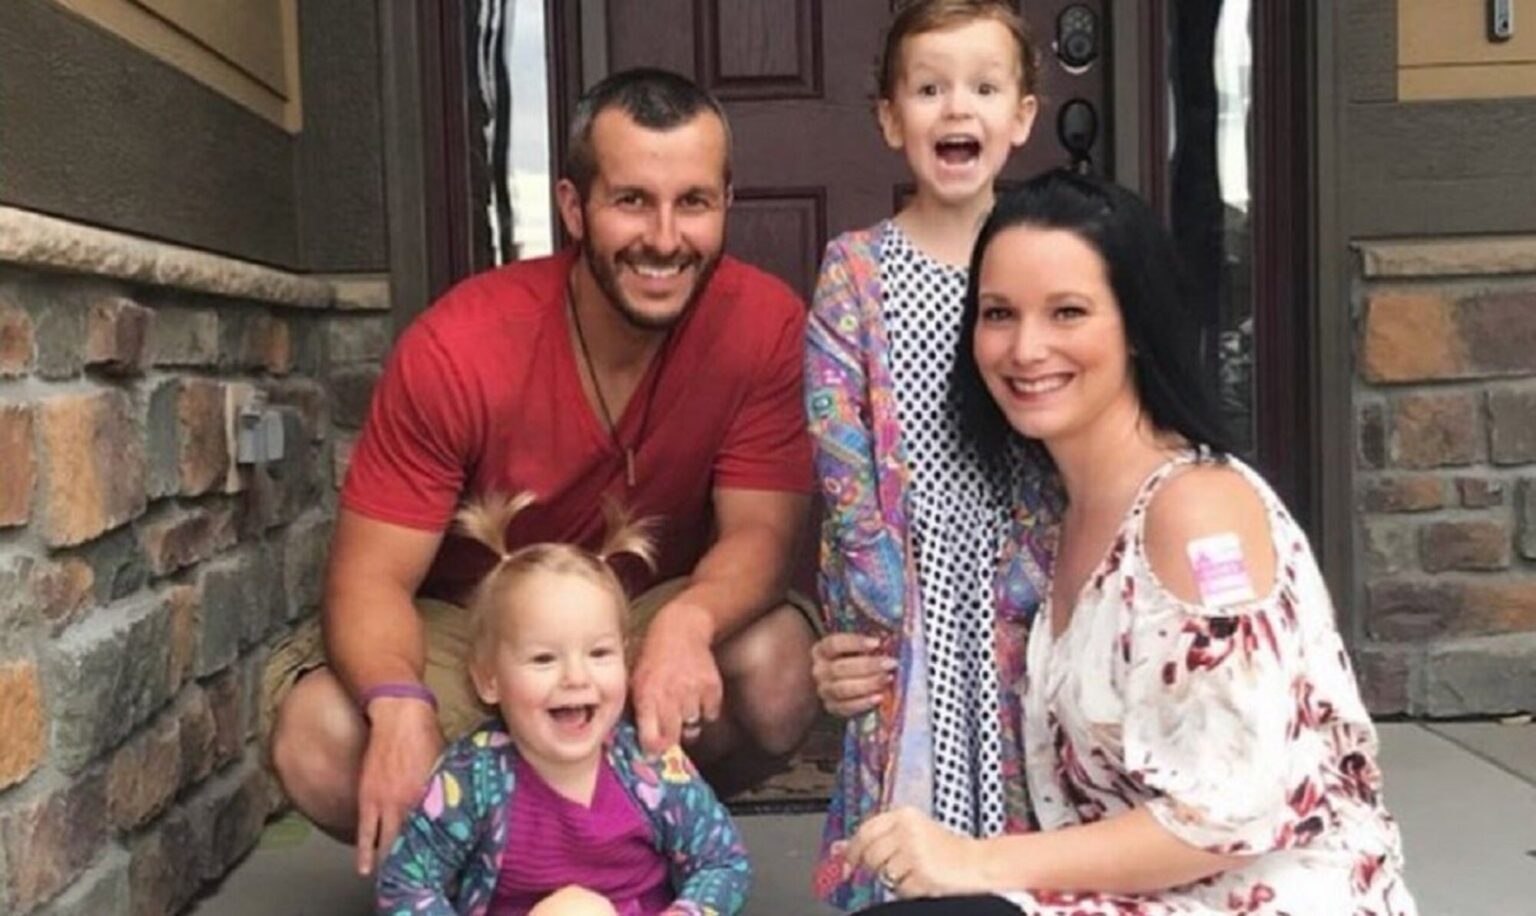 Did Chris Watts plan to murder his family all along? His letters from prison give us an update on his story.